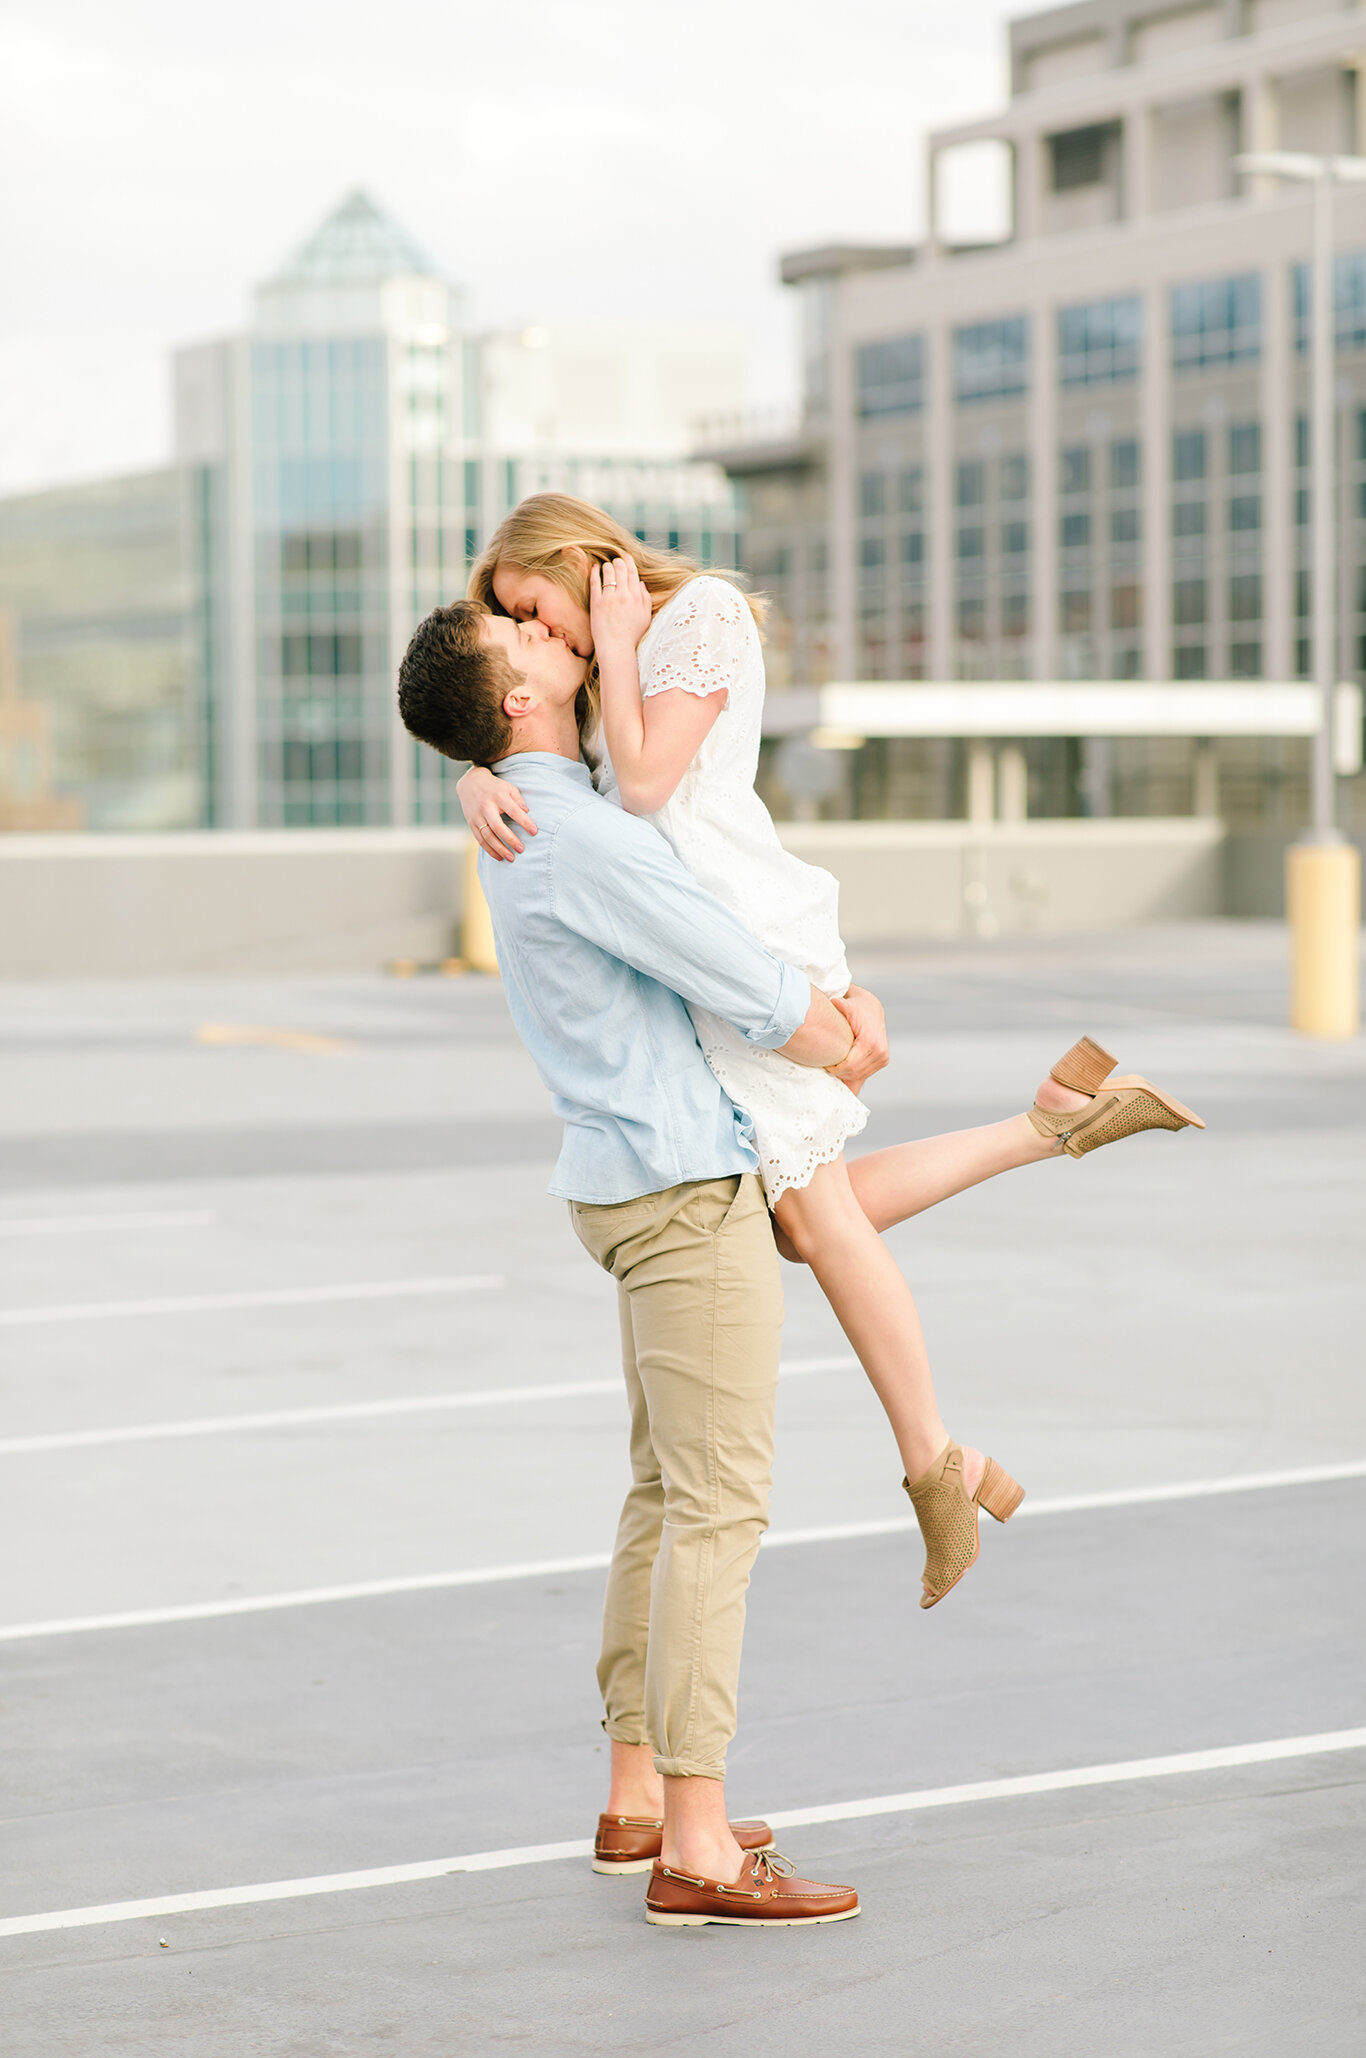  light blue collared casual shirt white lace short sleeve dress loose hanging curls lift toes pointed kissing photo engagement photo session rooftop photo shoot salt lake city utah professional utah valley engagement photographer #downtownsaltlakecit